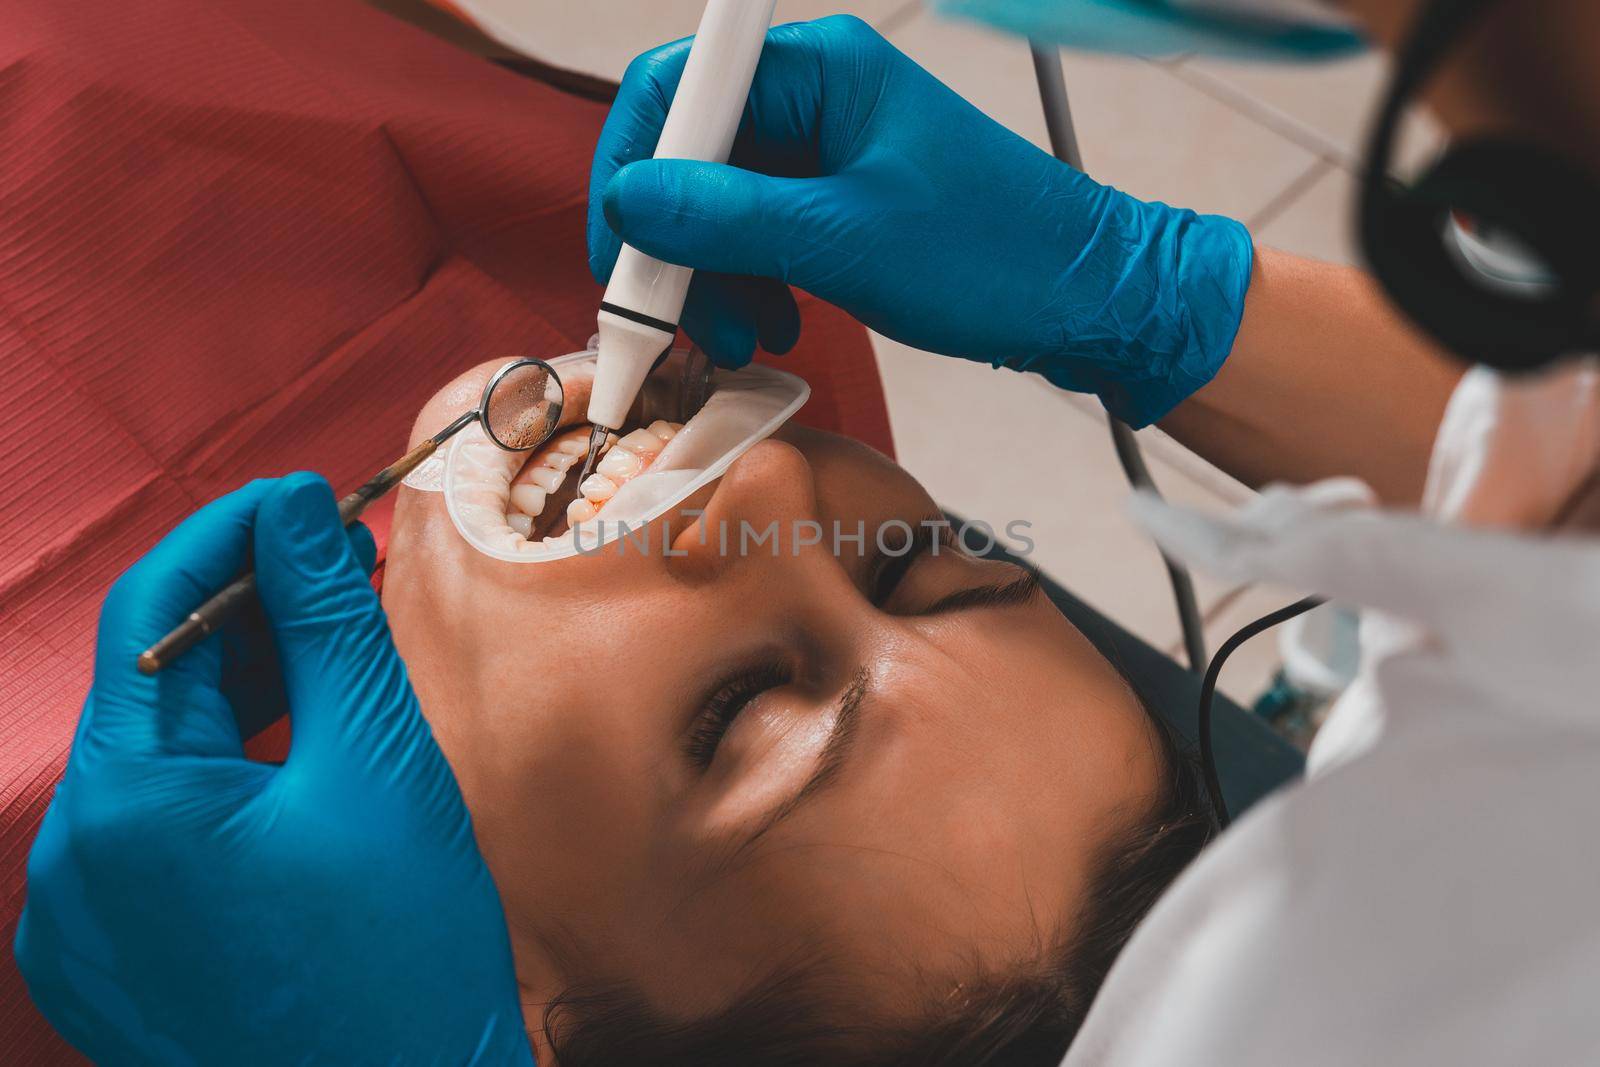 At the dentist's appointment, tartar removal, use of ultrasound, patient and dentist. Retractor for isolation of lips and gums. by Niko_Cingaryuk